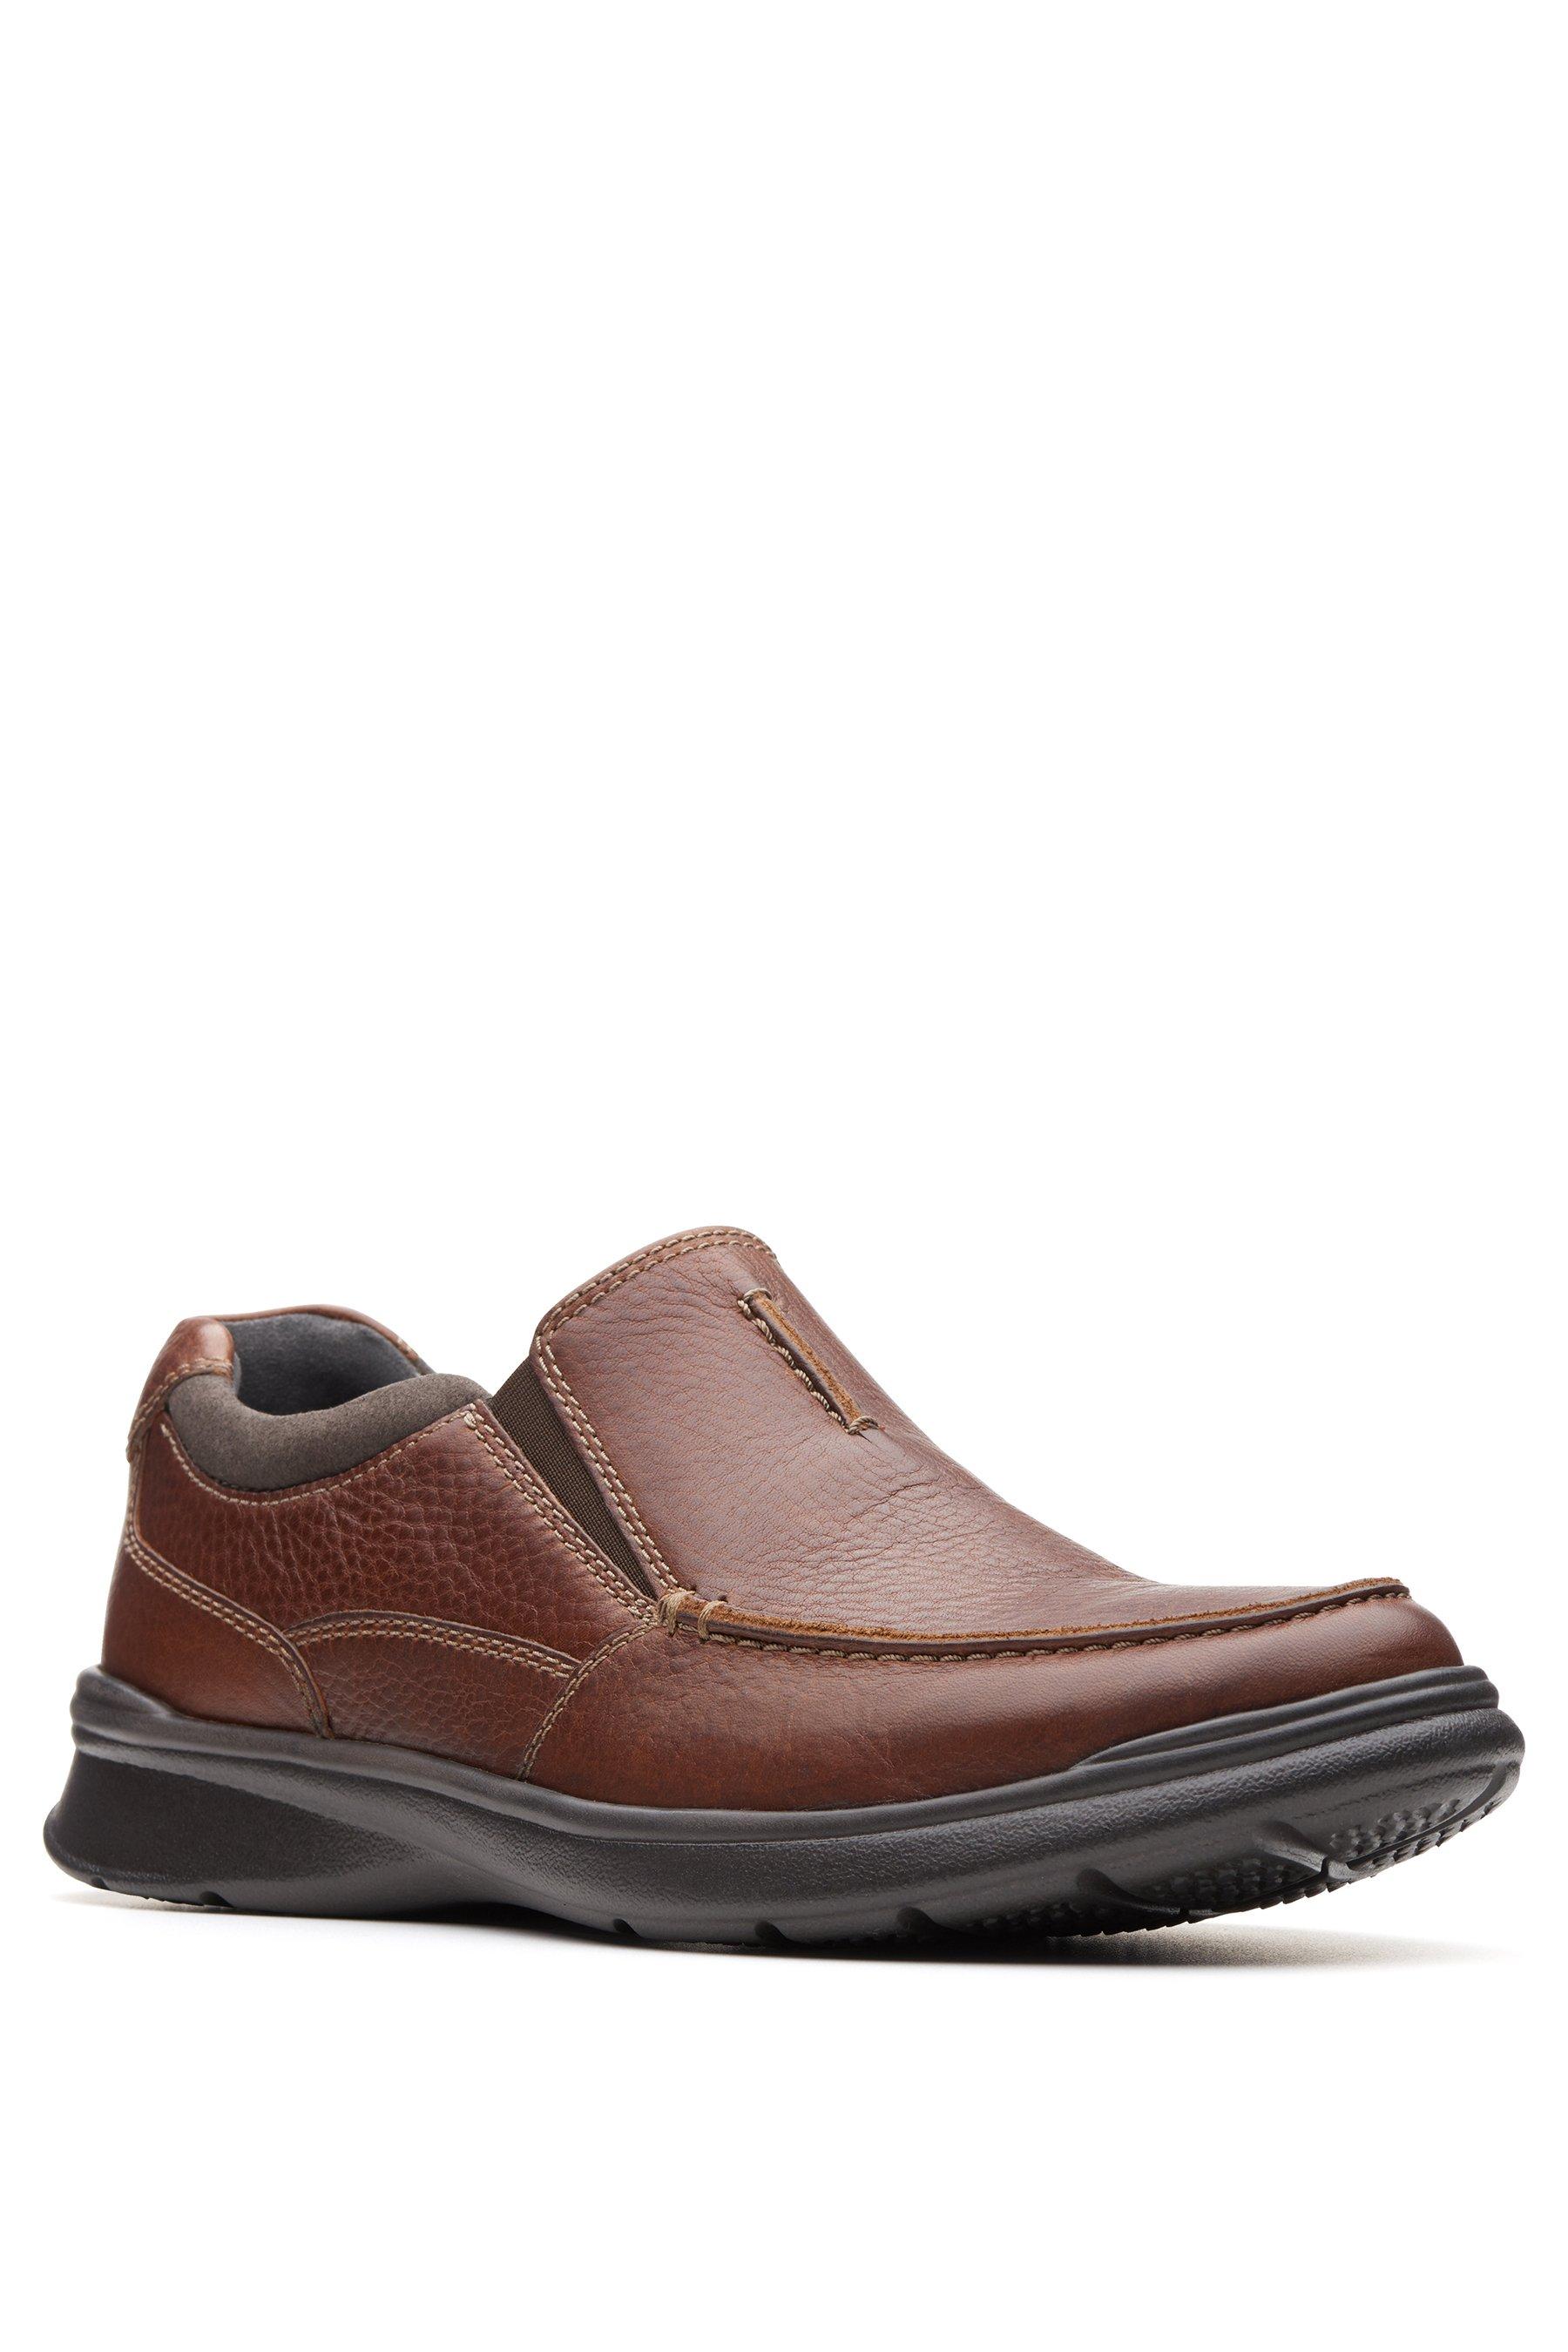 clarks cotrell free slip shoes - mens - brown - size: 7